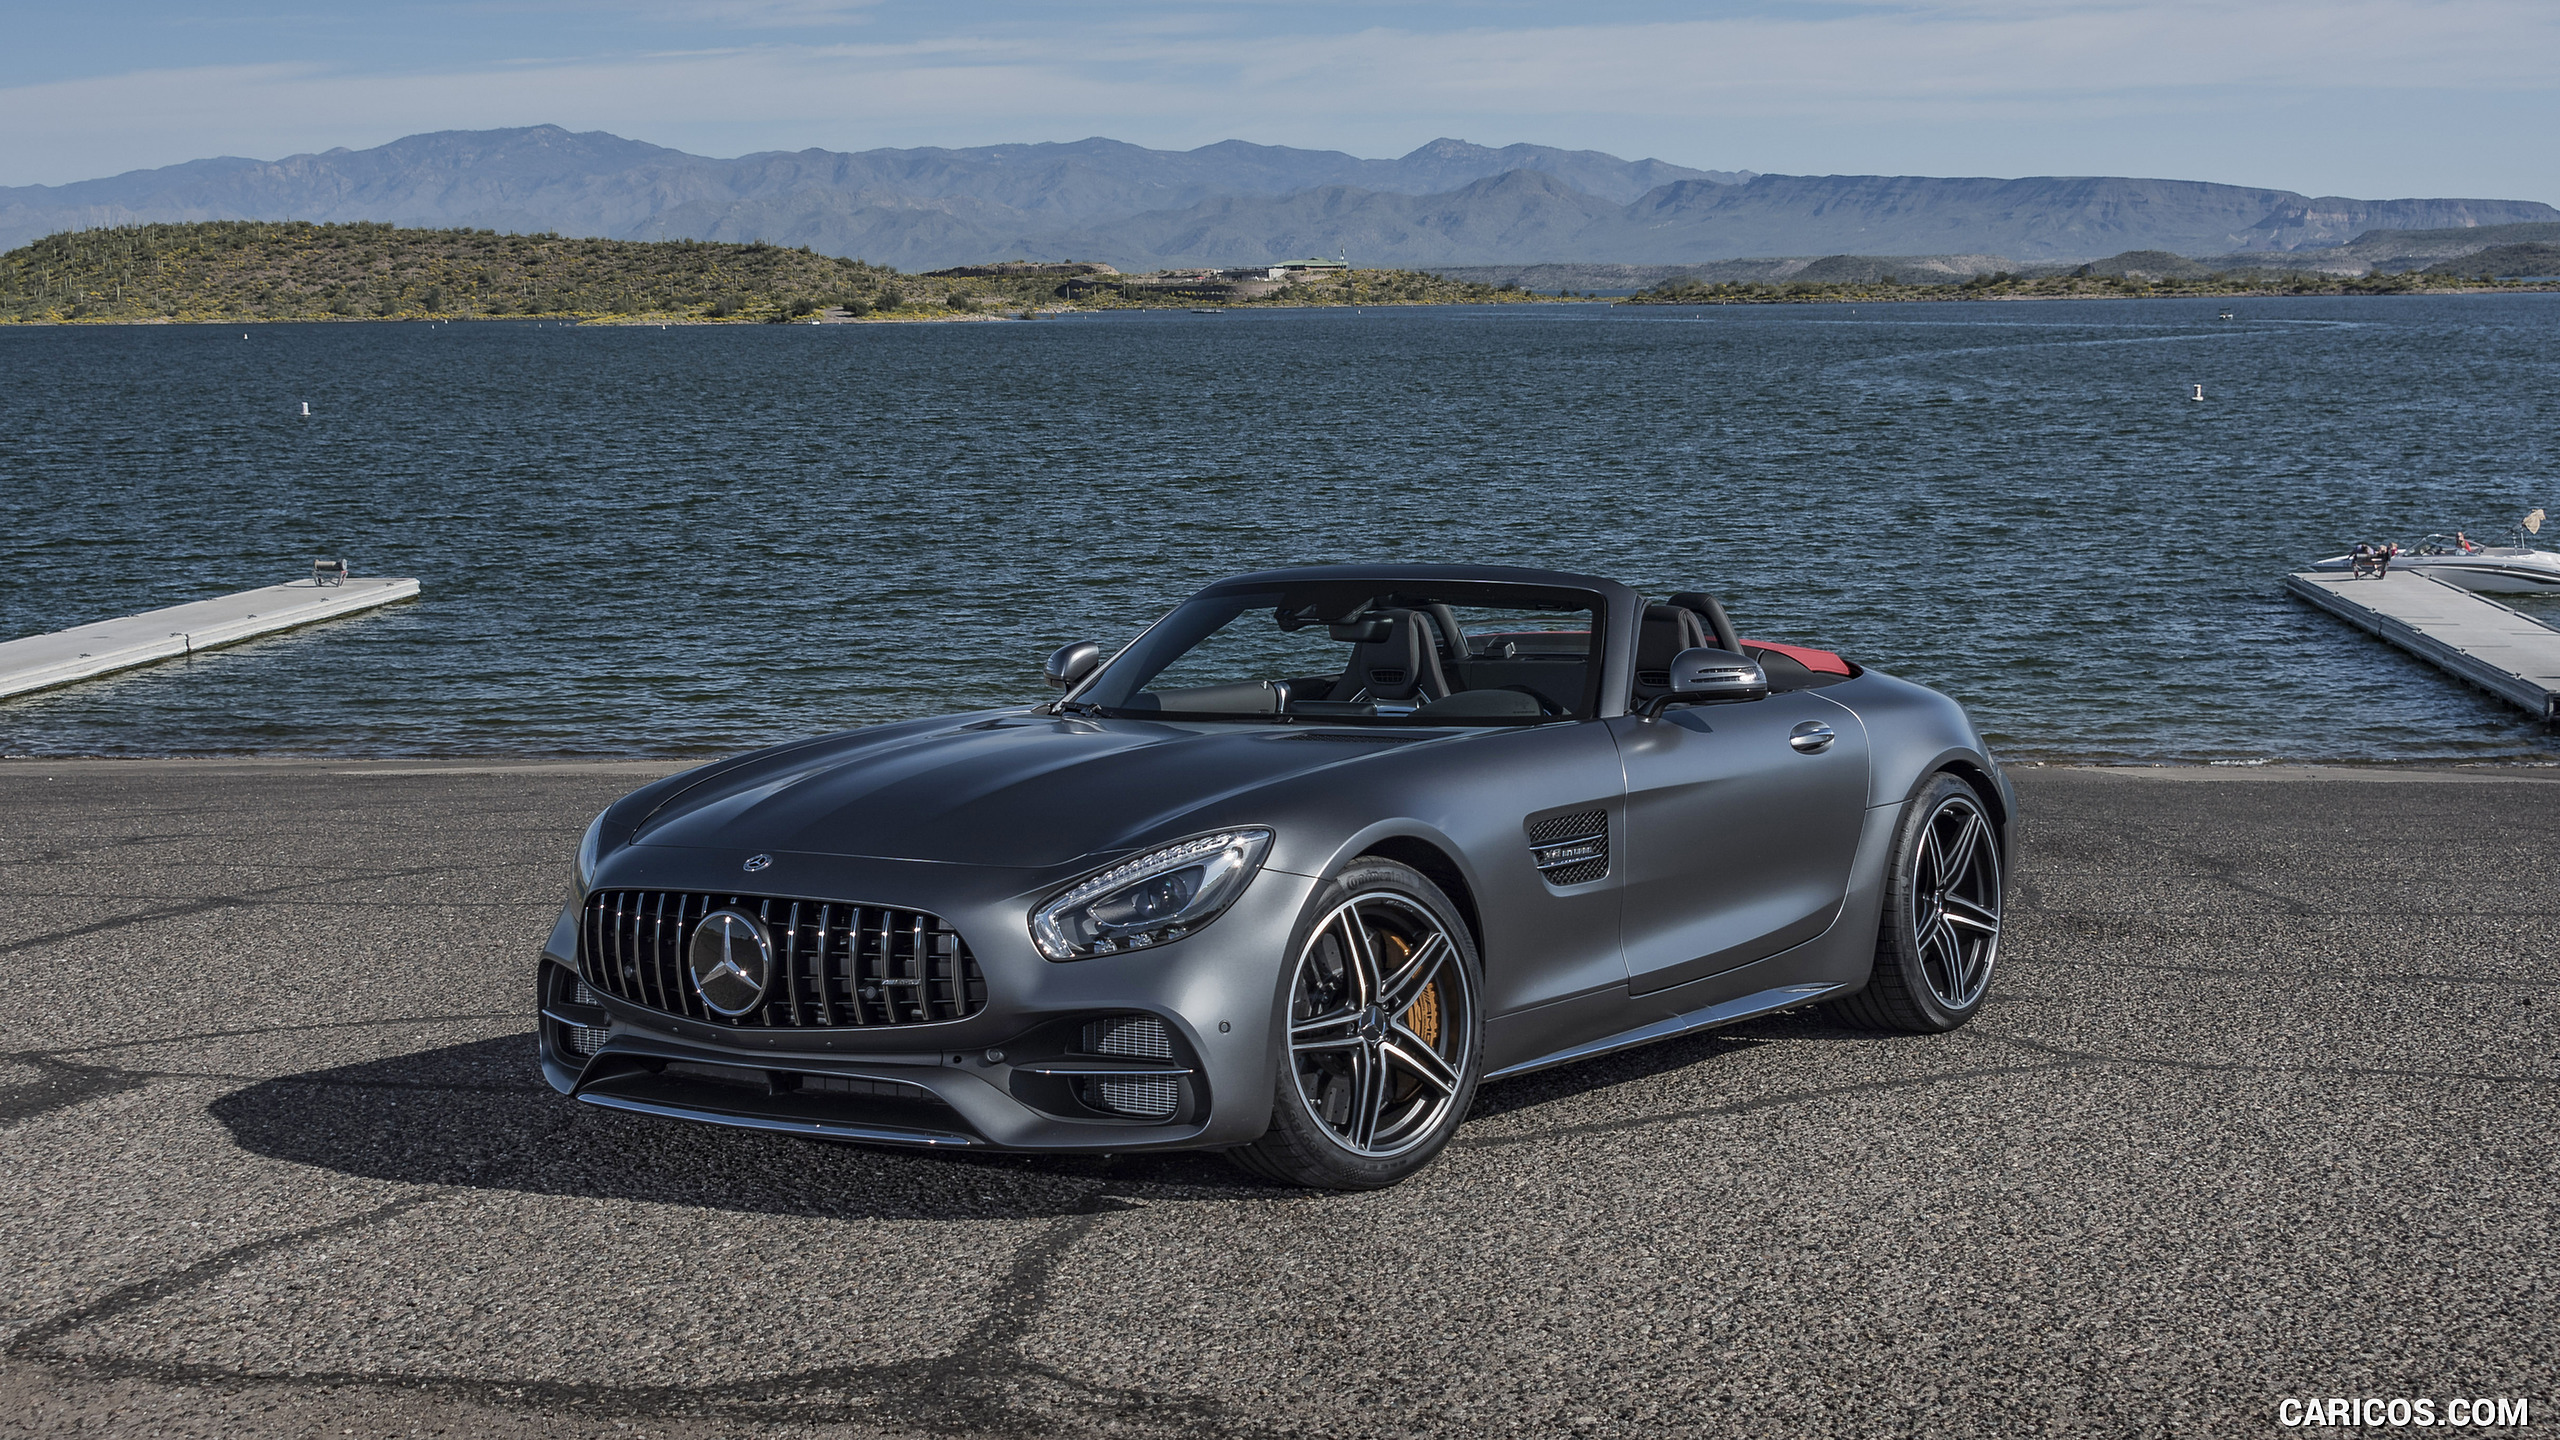 2018 Mercedes-AMG GT C Roadster - Front Three-Quarter, #298 of 350